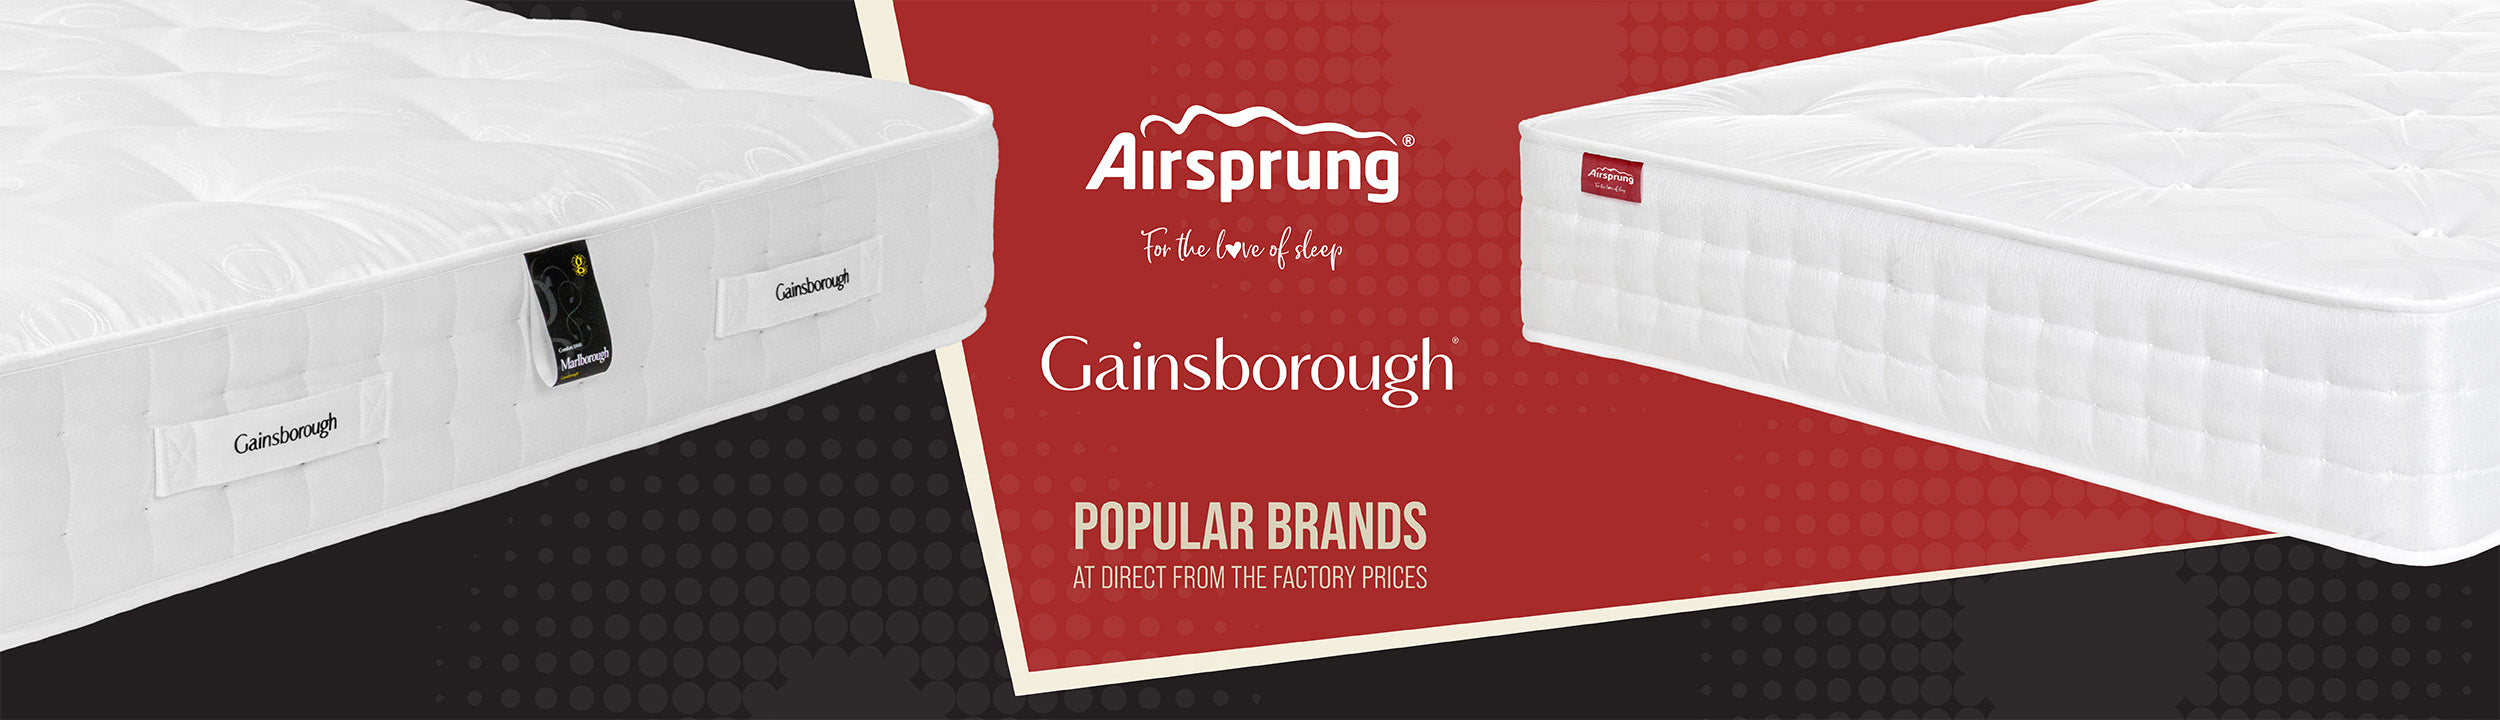 Airsprung & Gainsborough - Popular Brands at Direct From the Factory Shop Prices